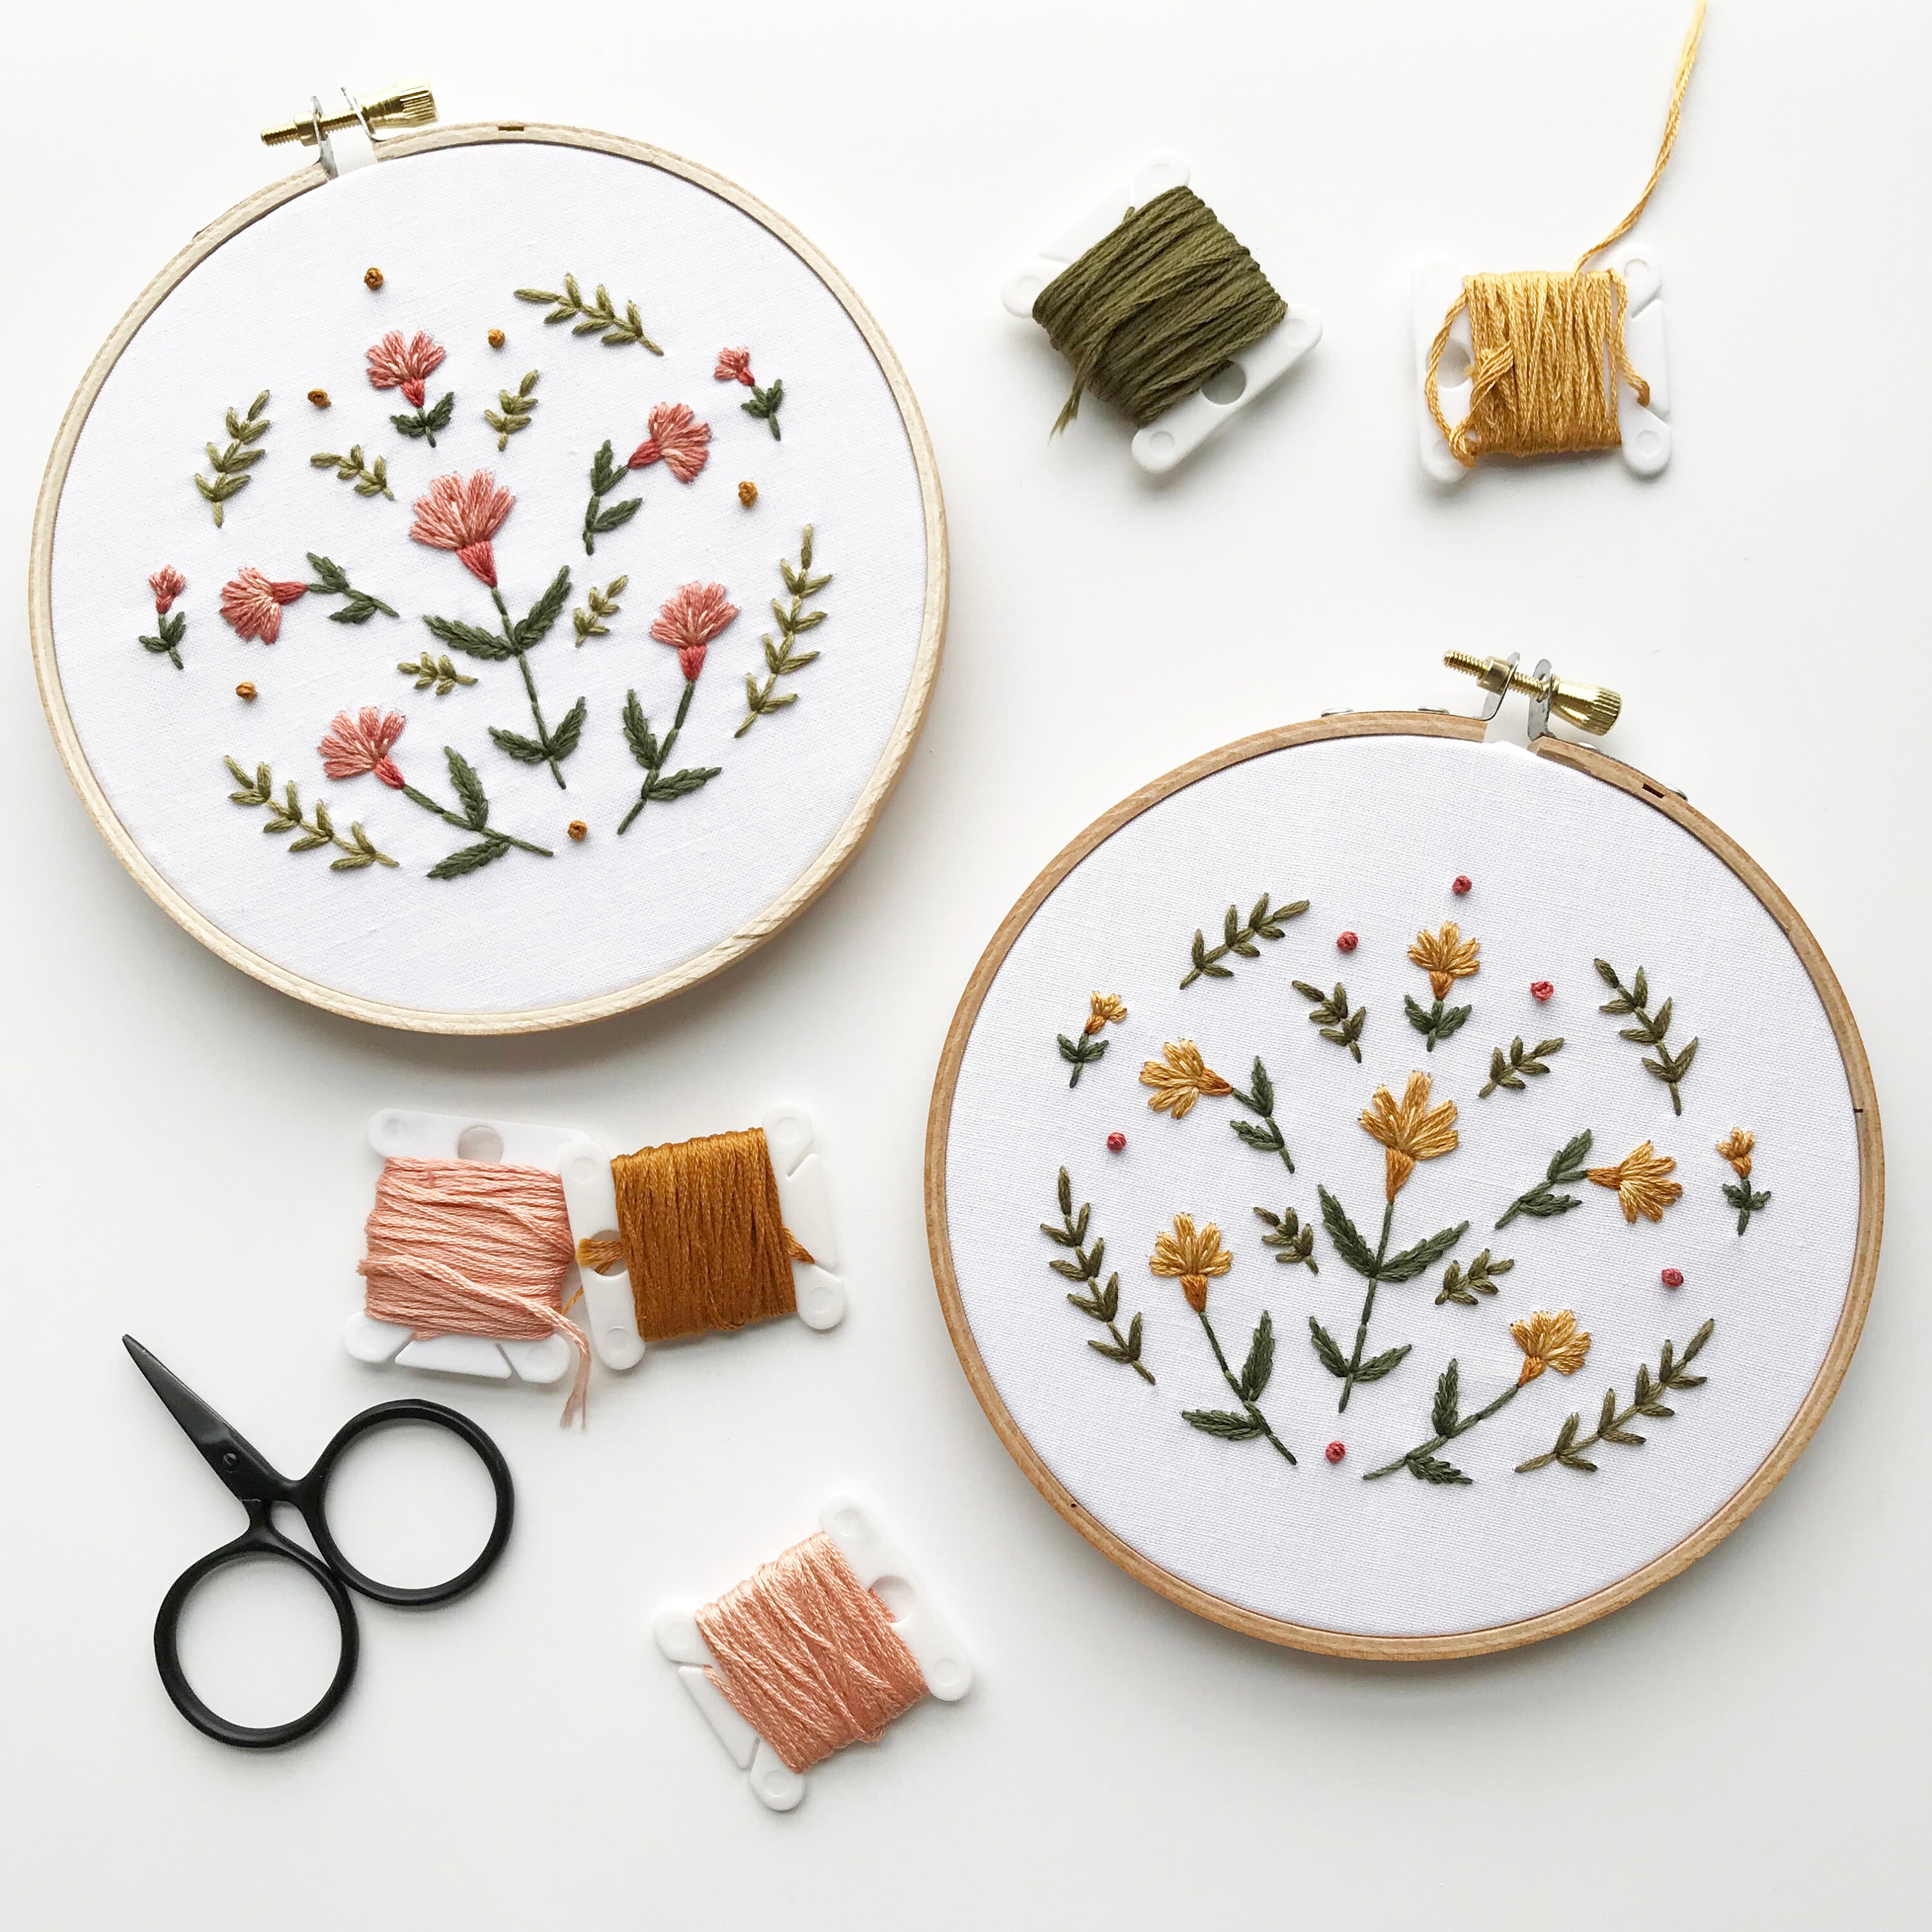 Rose Embroidery Kit, June Flower Embroidery Kit, DIY Embroidery, Birth  Flower Embroidery, Beginner Level, Embroidery How To, Intermediate 